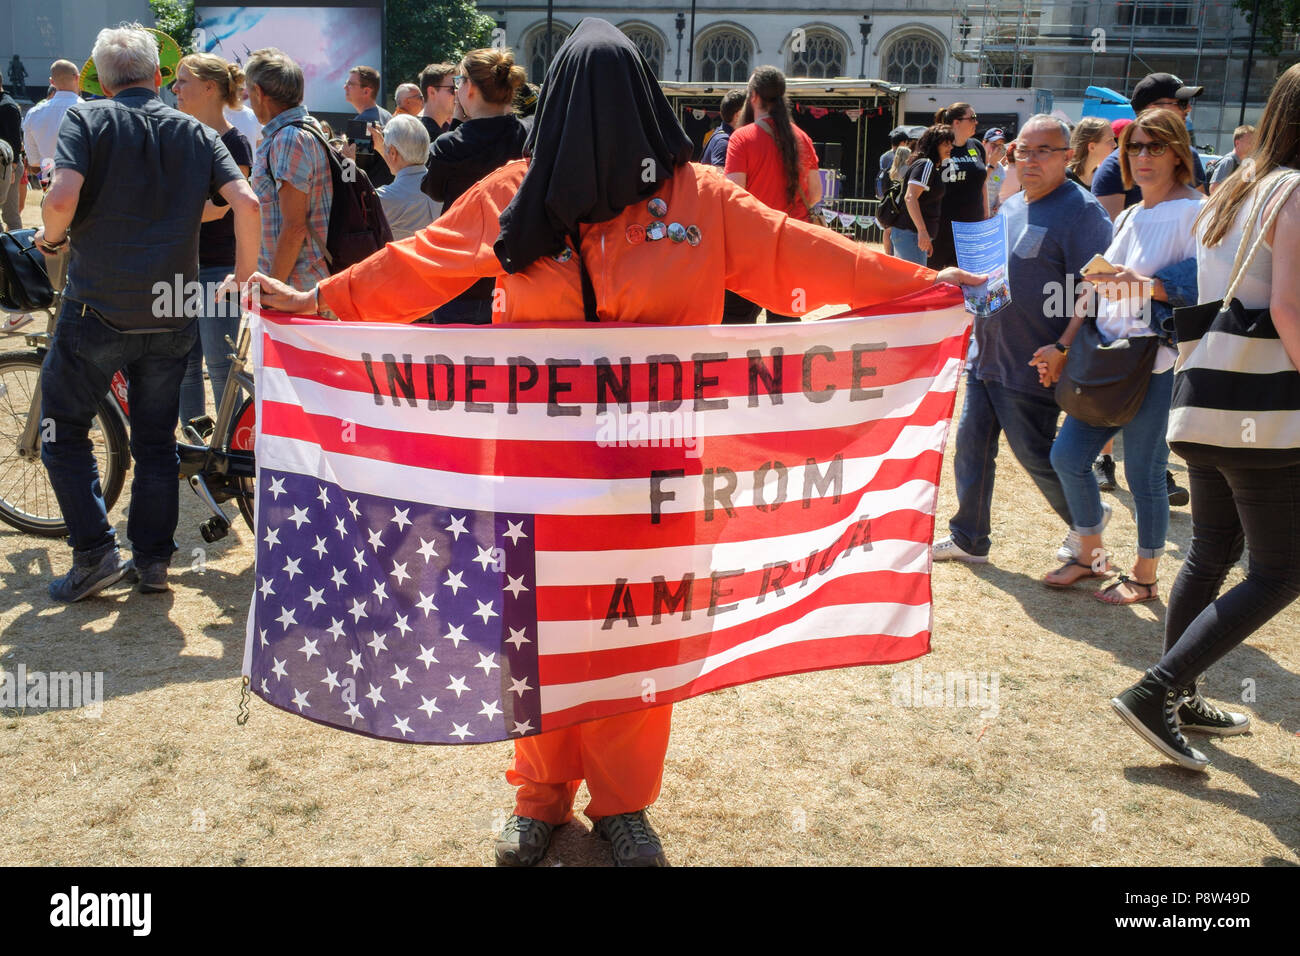 London, UK. 13th July 2018. Tens of thousands of people took to the streets of central London to protest against US President Donald Trump's visit to the UK. Pictured: A hooded and orange jumpsuit clad figure holds an inverted US flag with the words Independence from America stencilled on it. Credit: mark phillips/Alamy Live News Stock Photo